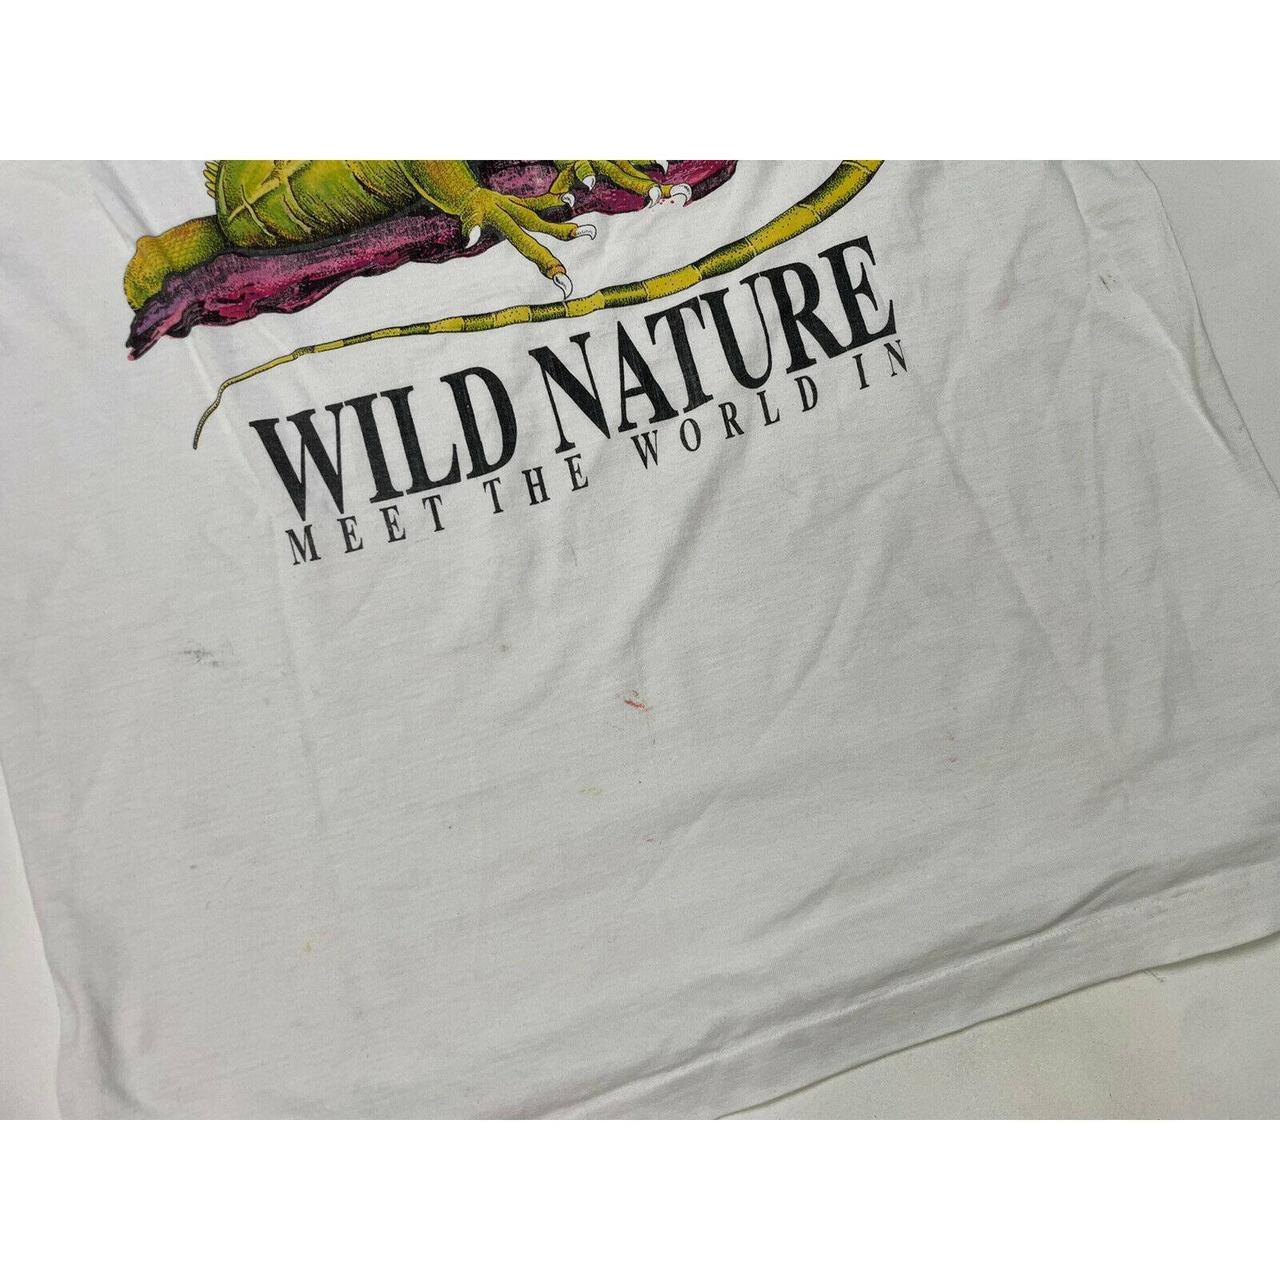 Product Image 3 - VINTAGE Wild Nature Meet The